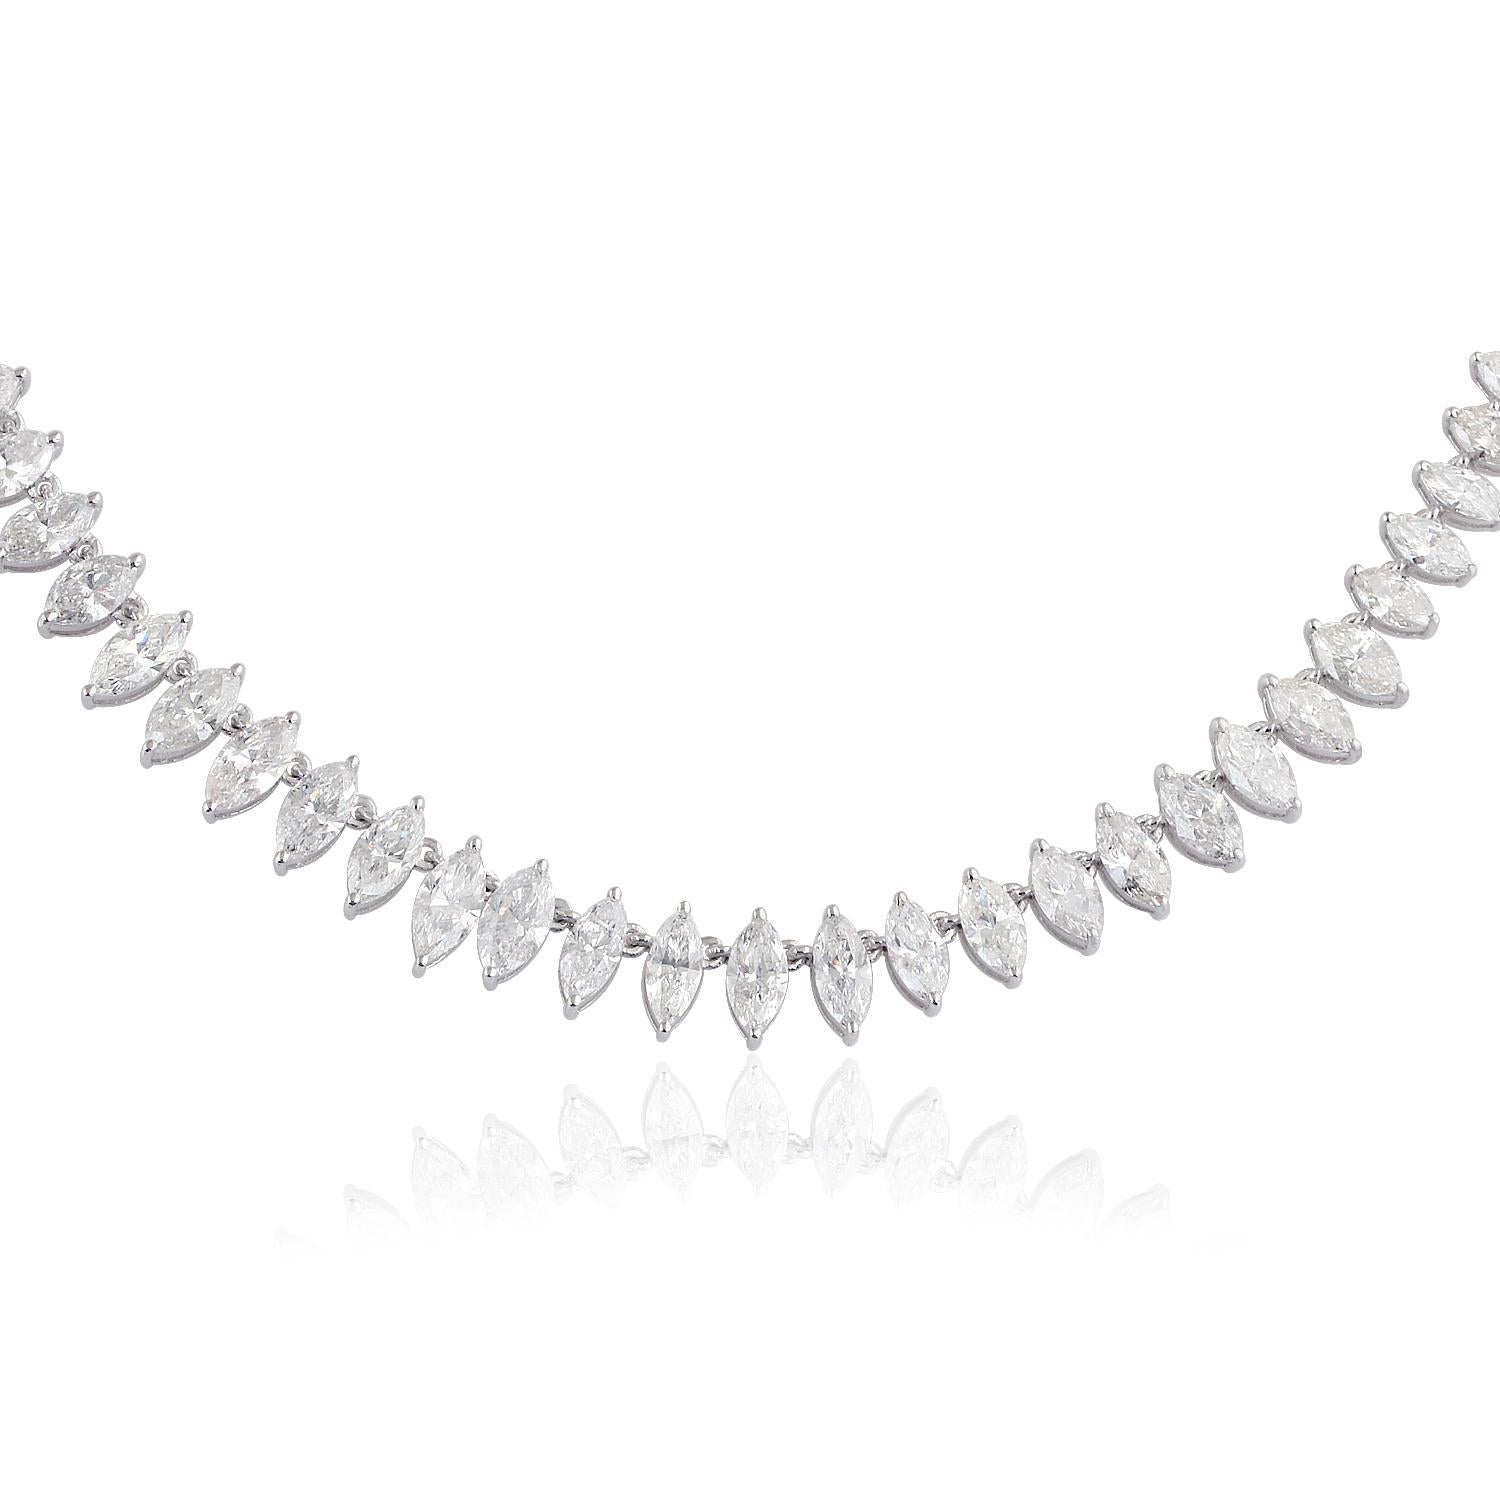 Cast from 14-karat white gold, this marquise necklace is hand set with 16.80 carats of sparkling diamonds. 

FOLLOW MEGHNA JEWELS storefront to view the latest collection & exclusive pieces. Meghna Jewels is proudly rated as a Top Seller on 1stdibs